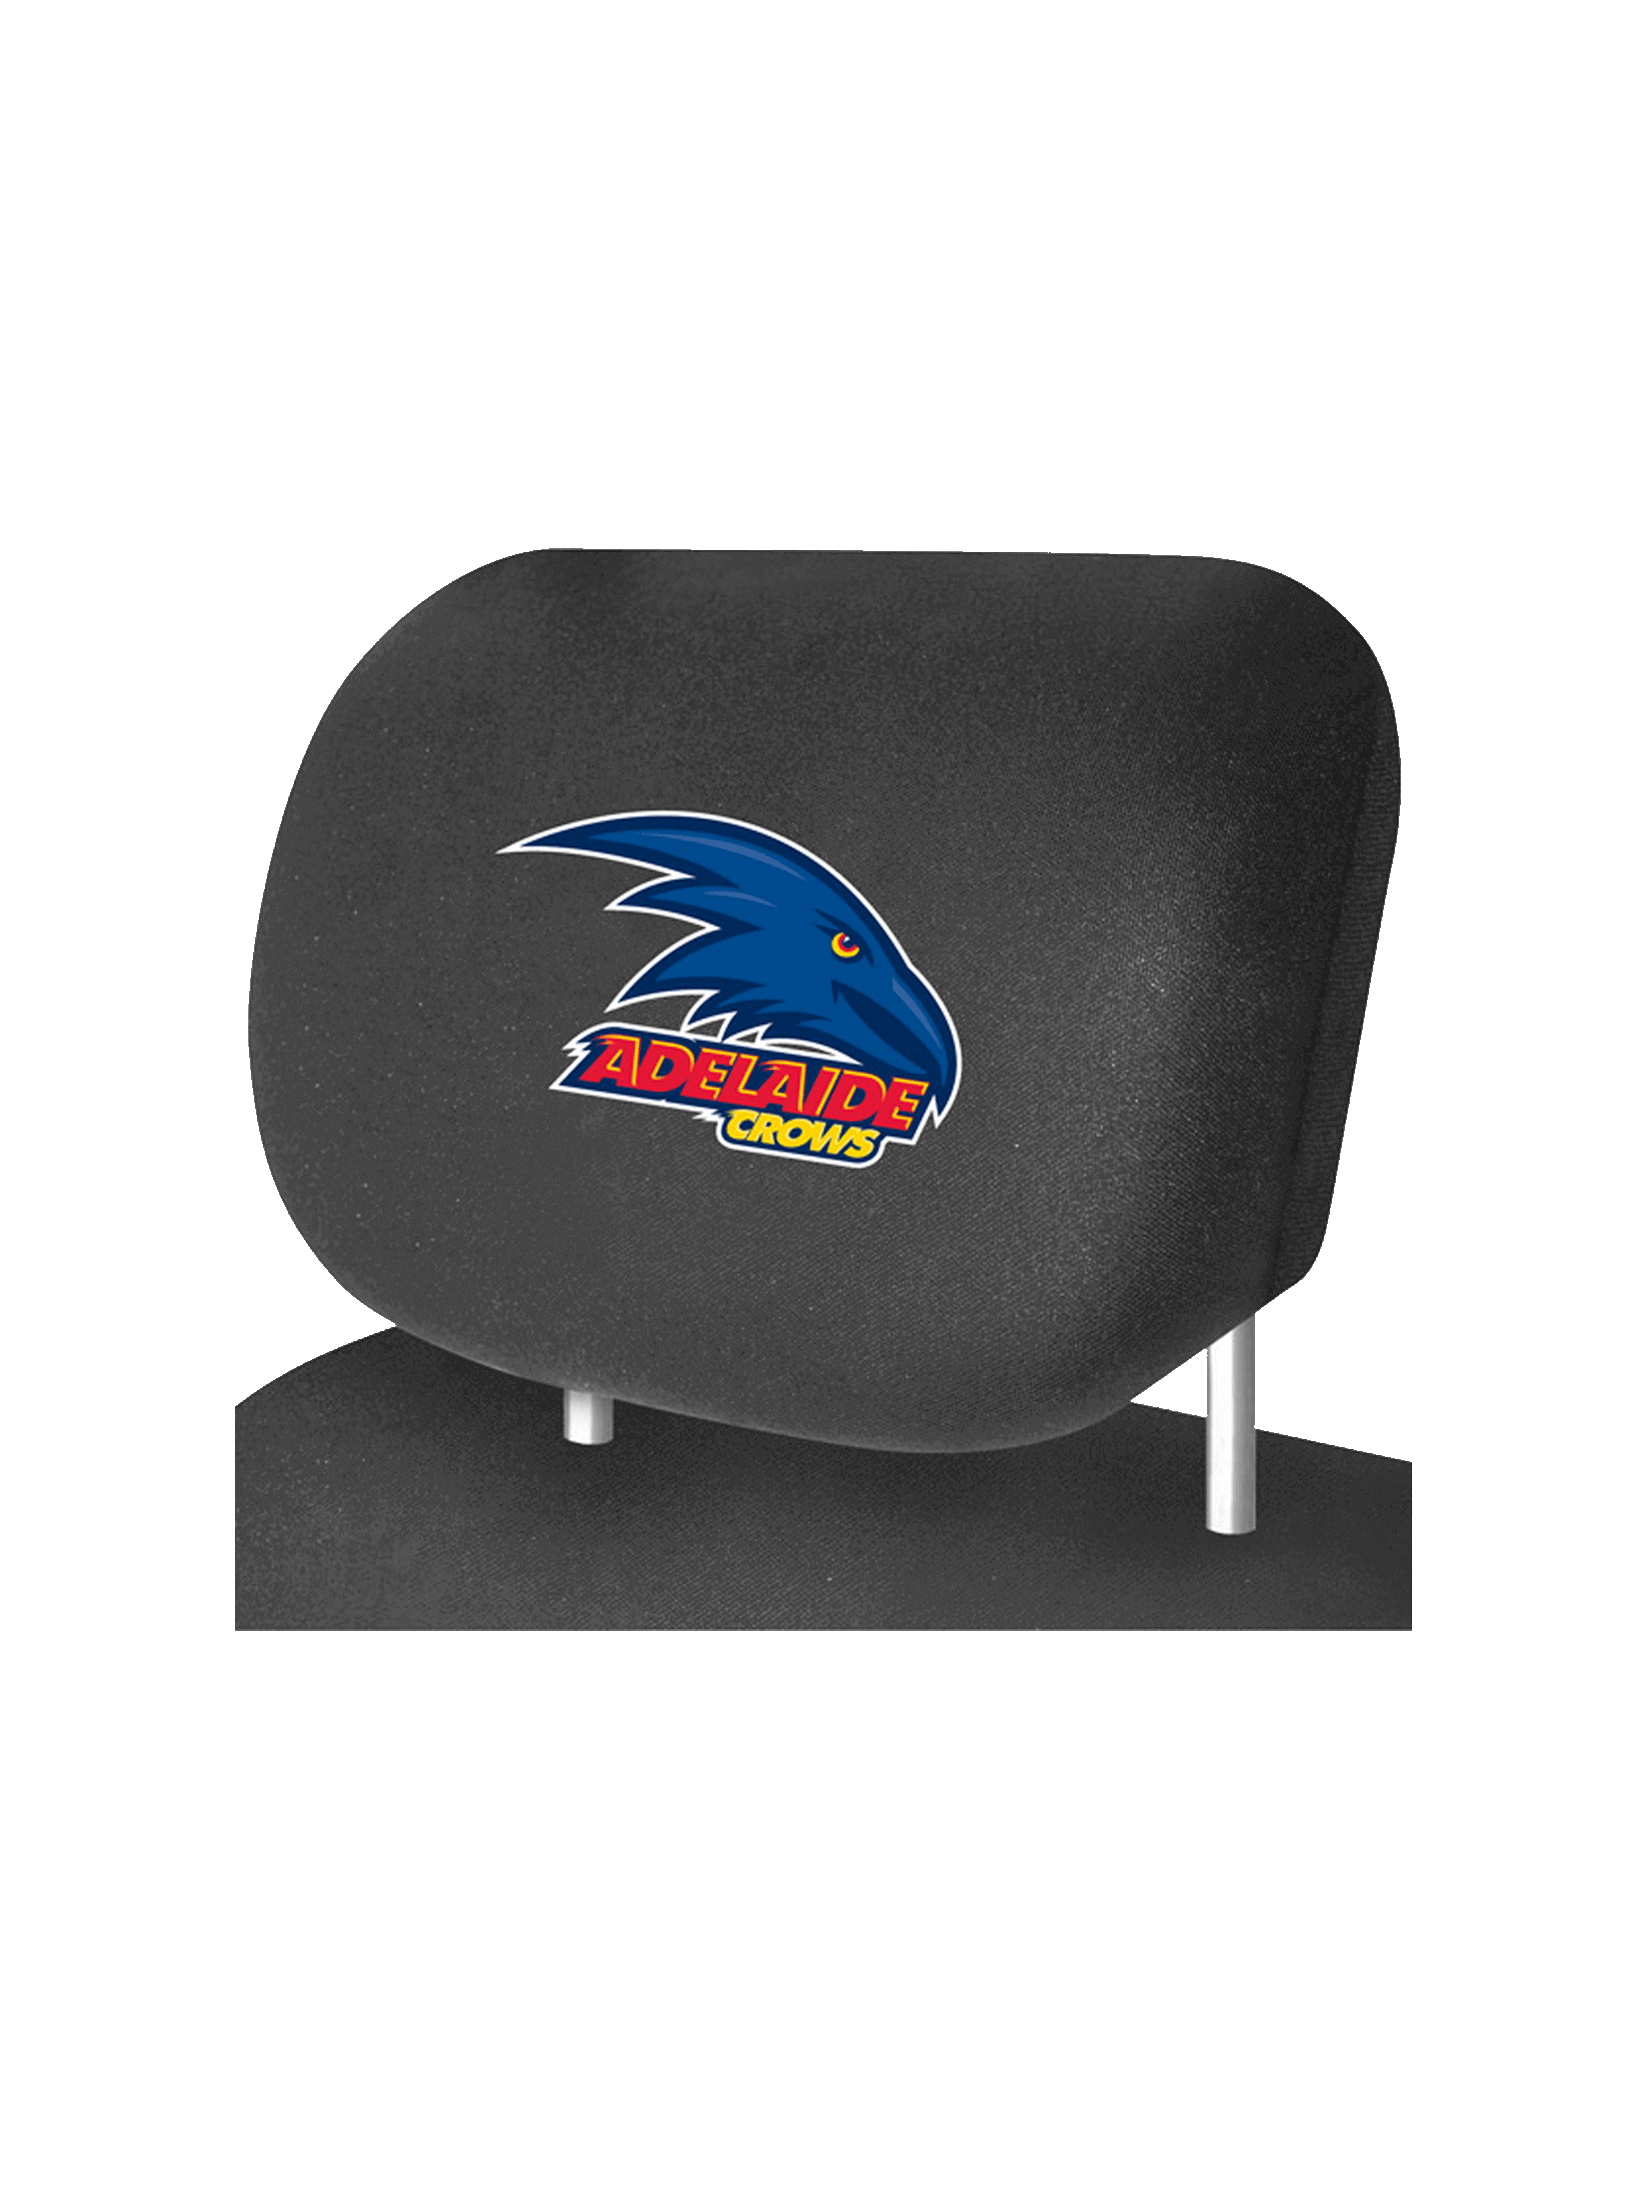 ADELAIDE CROWS OFFICIAL HEADREST COVER_ADELAIDE CROWS_ STUBBY CLUB